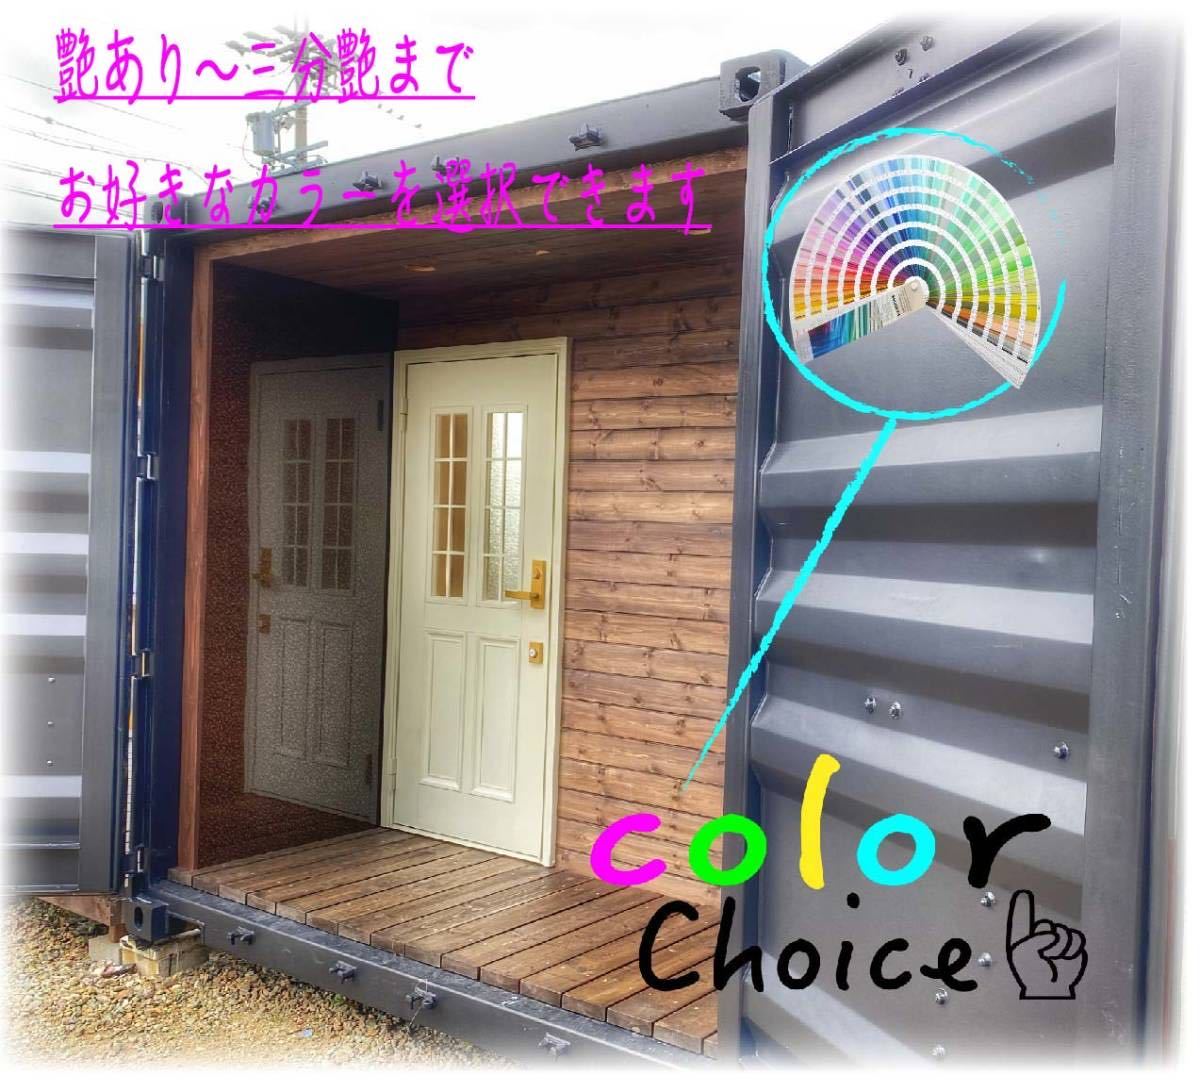 [ Gifu departure ]A package * container art 3* stylish *20ft container * container house * office work place * super house * garage * garden * prefab *